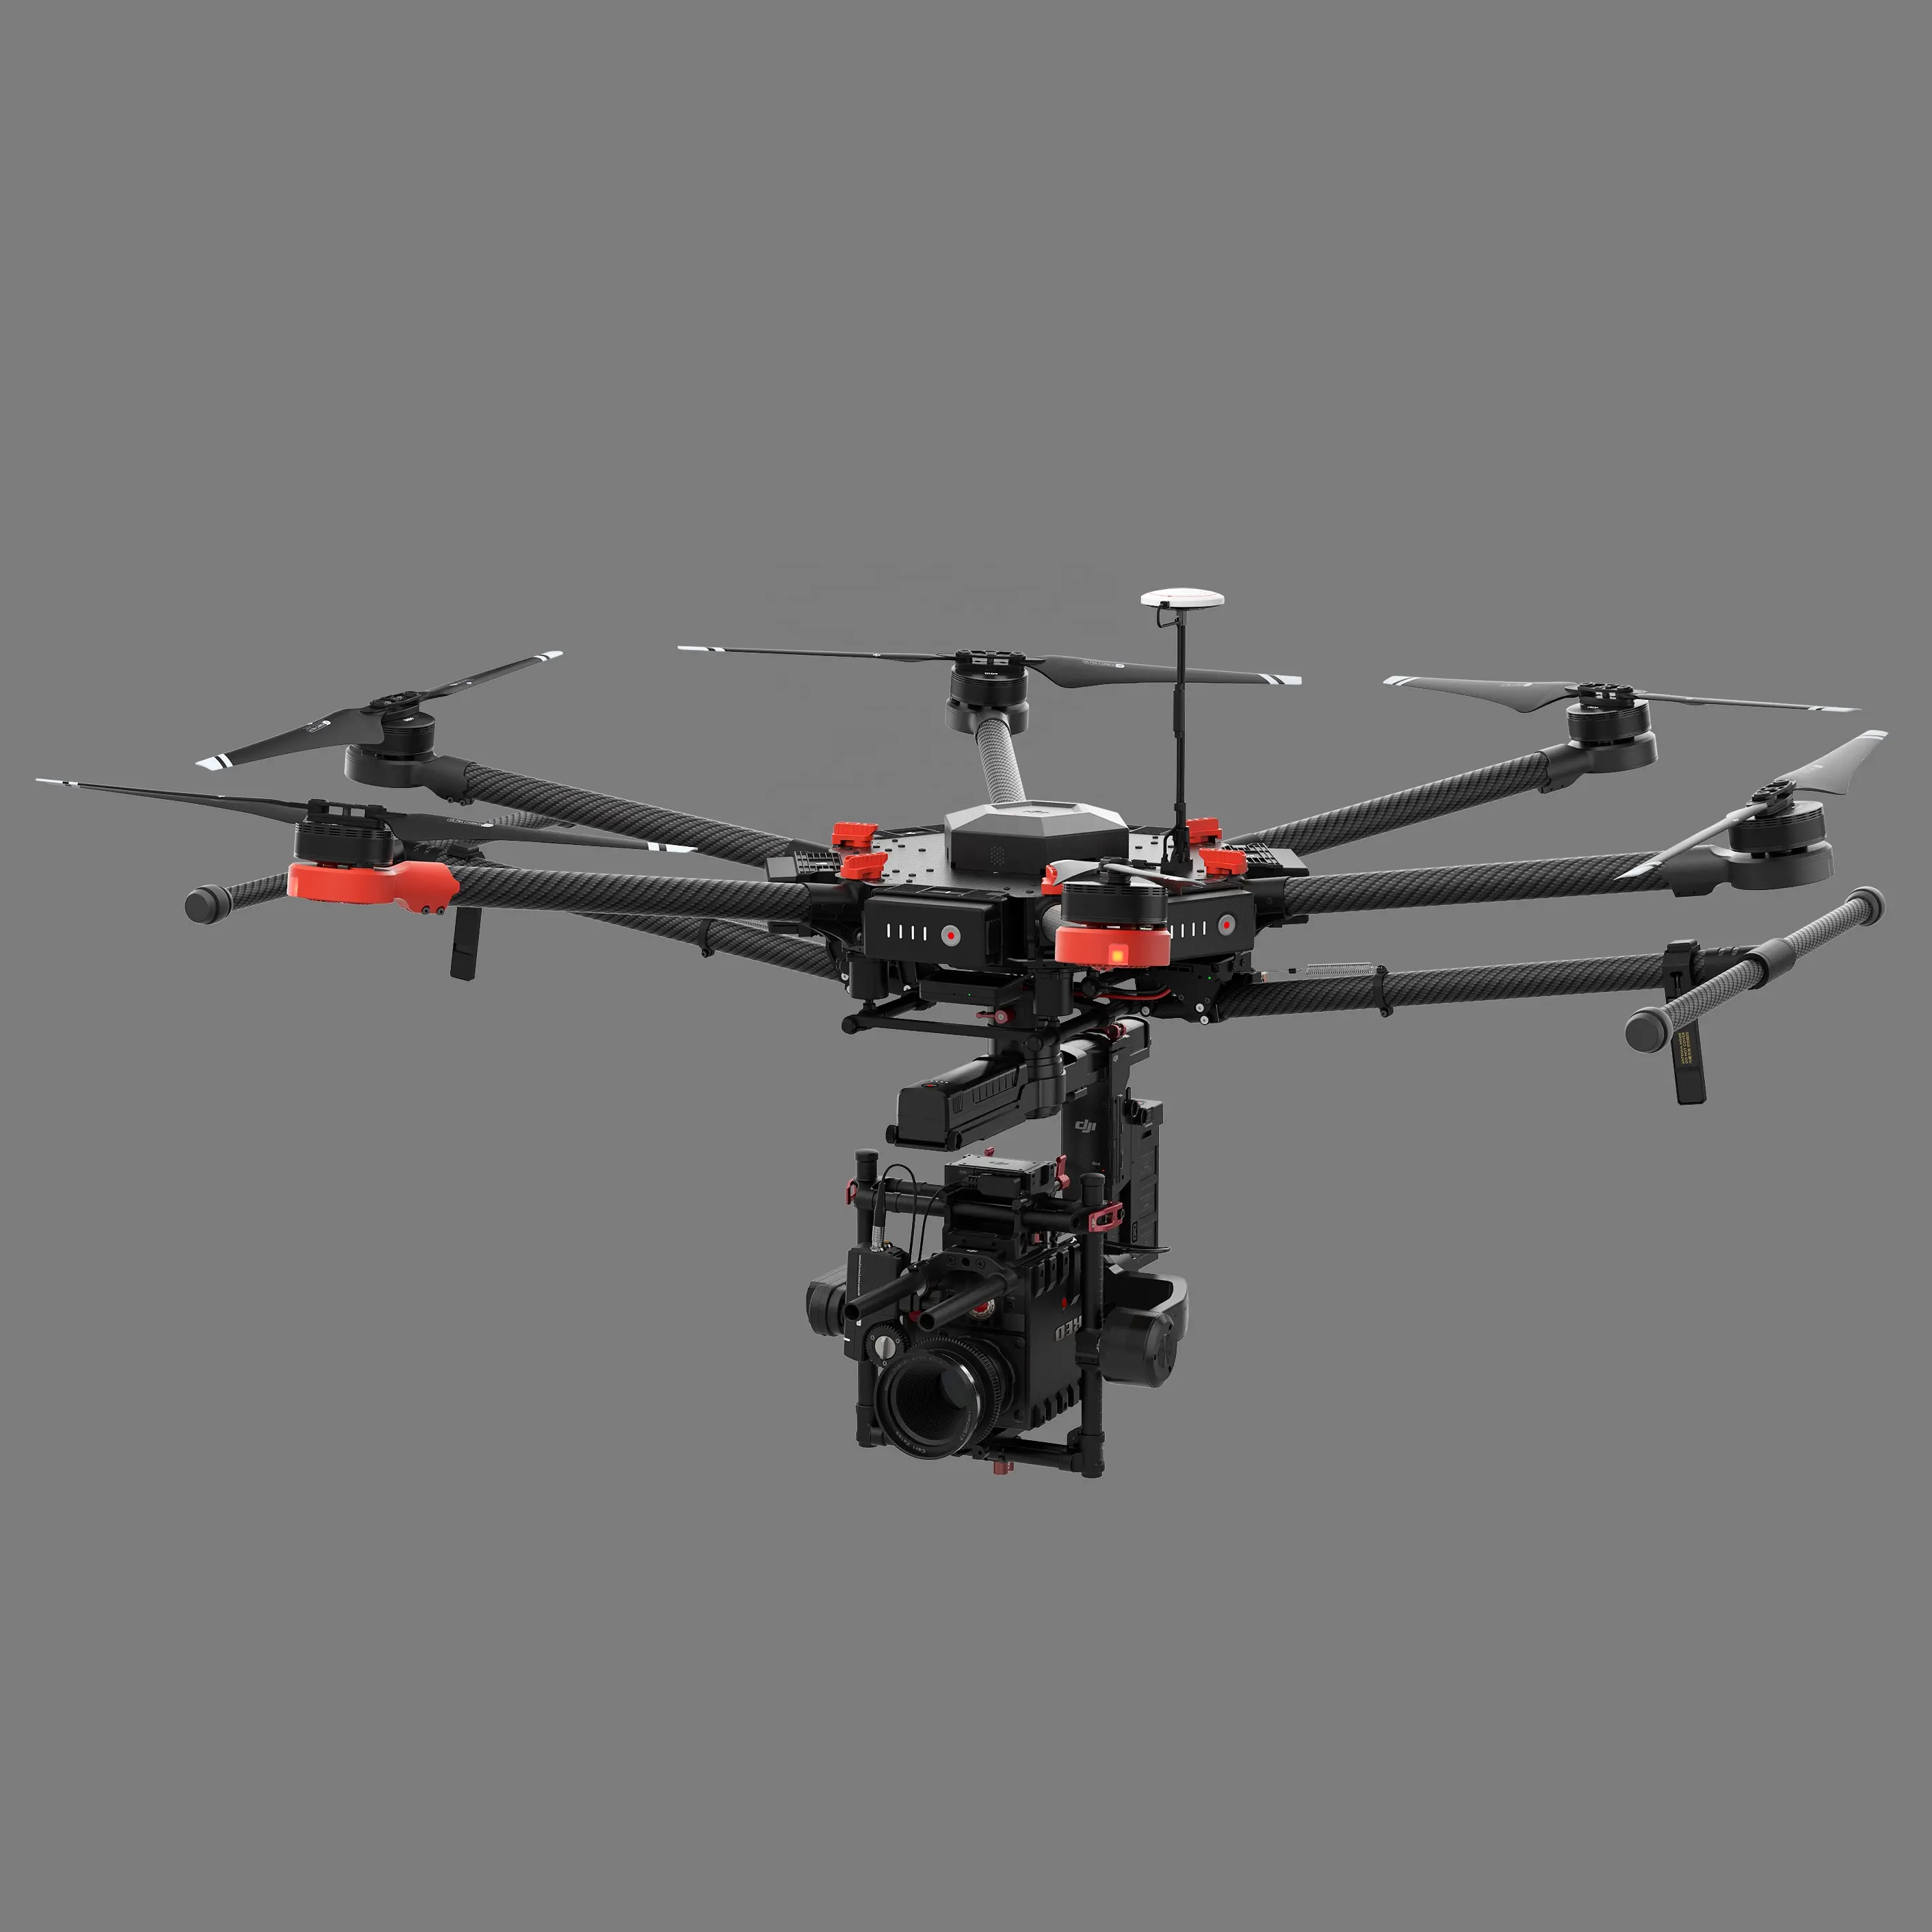 Wholesale 100% Original and Brand New for DJI Matrice 600 Pro drone